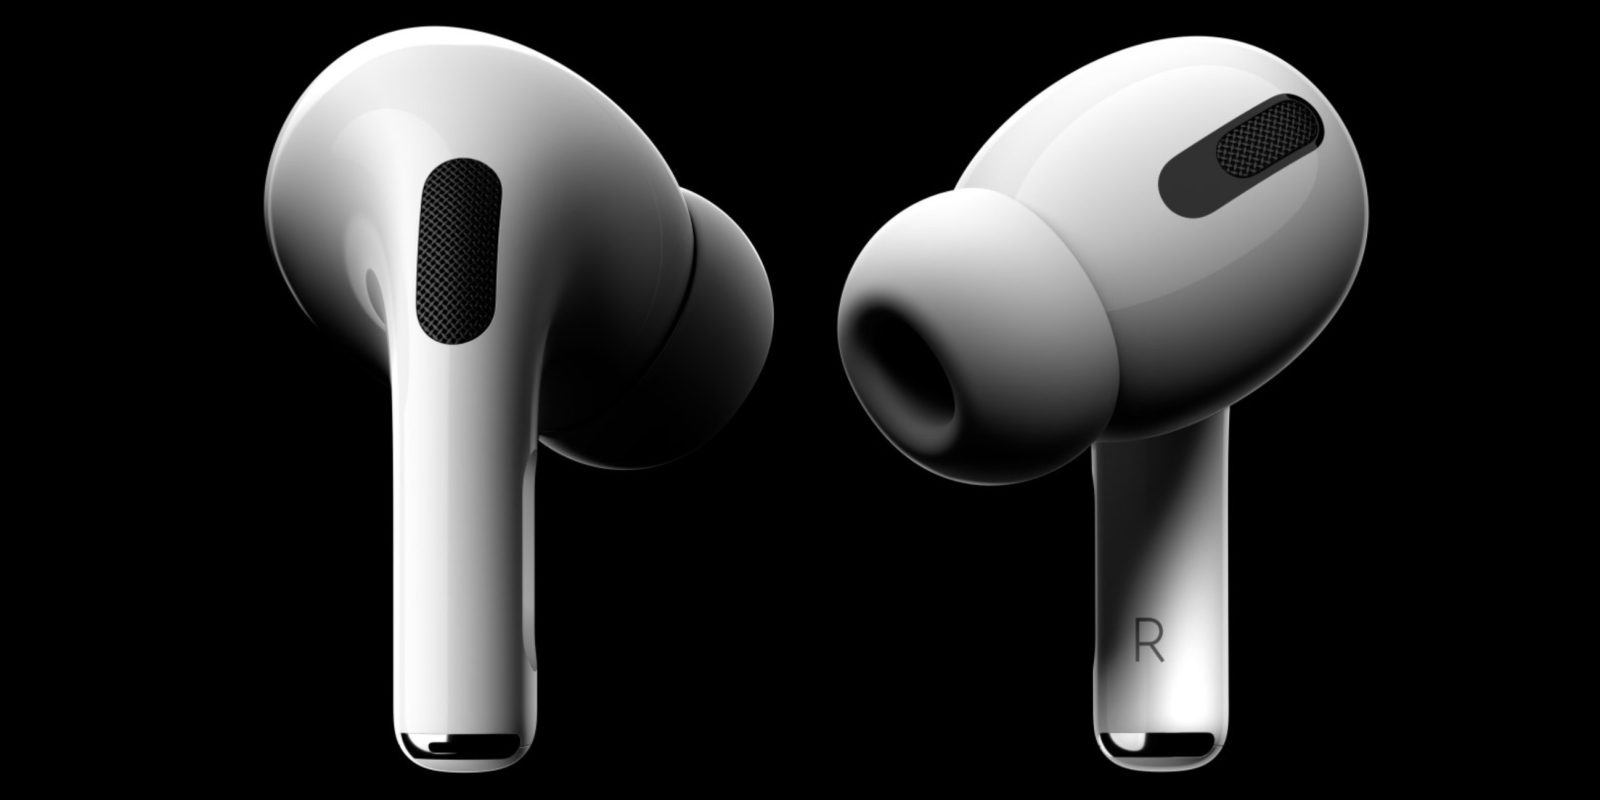 handicappet Hårdhed Elektriker AirPods Pro vs. AirPods comparison on features, size, price - 9to5Mac